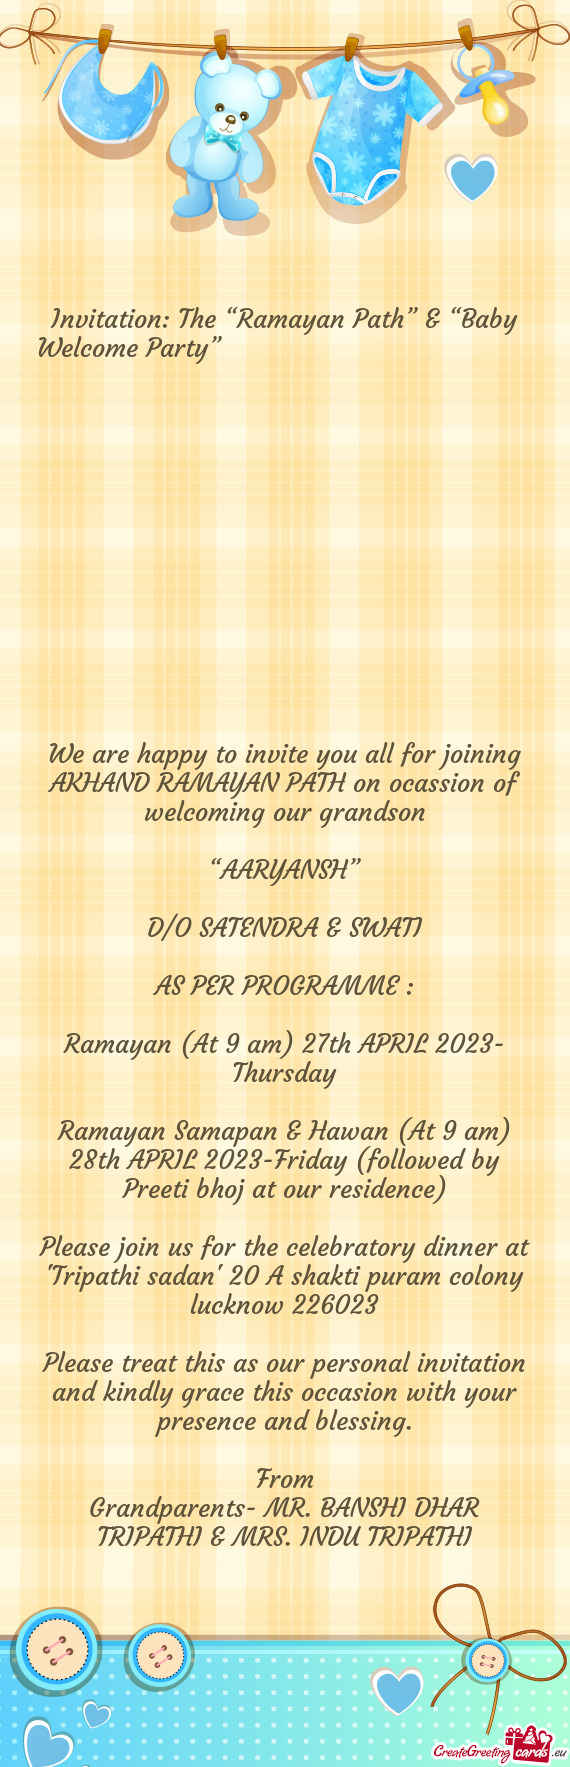 We are happy to invite you all for joining AKHAND RAMAYAN PATH on ocassion of welcoming our grandson